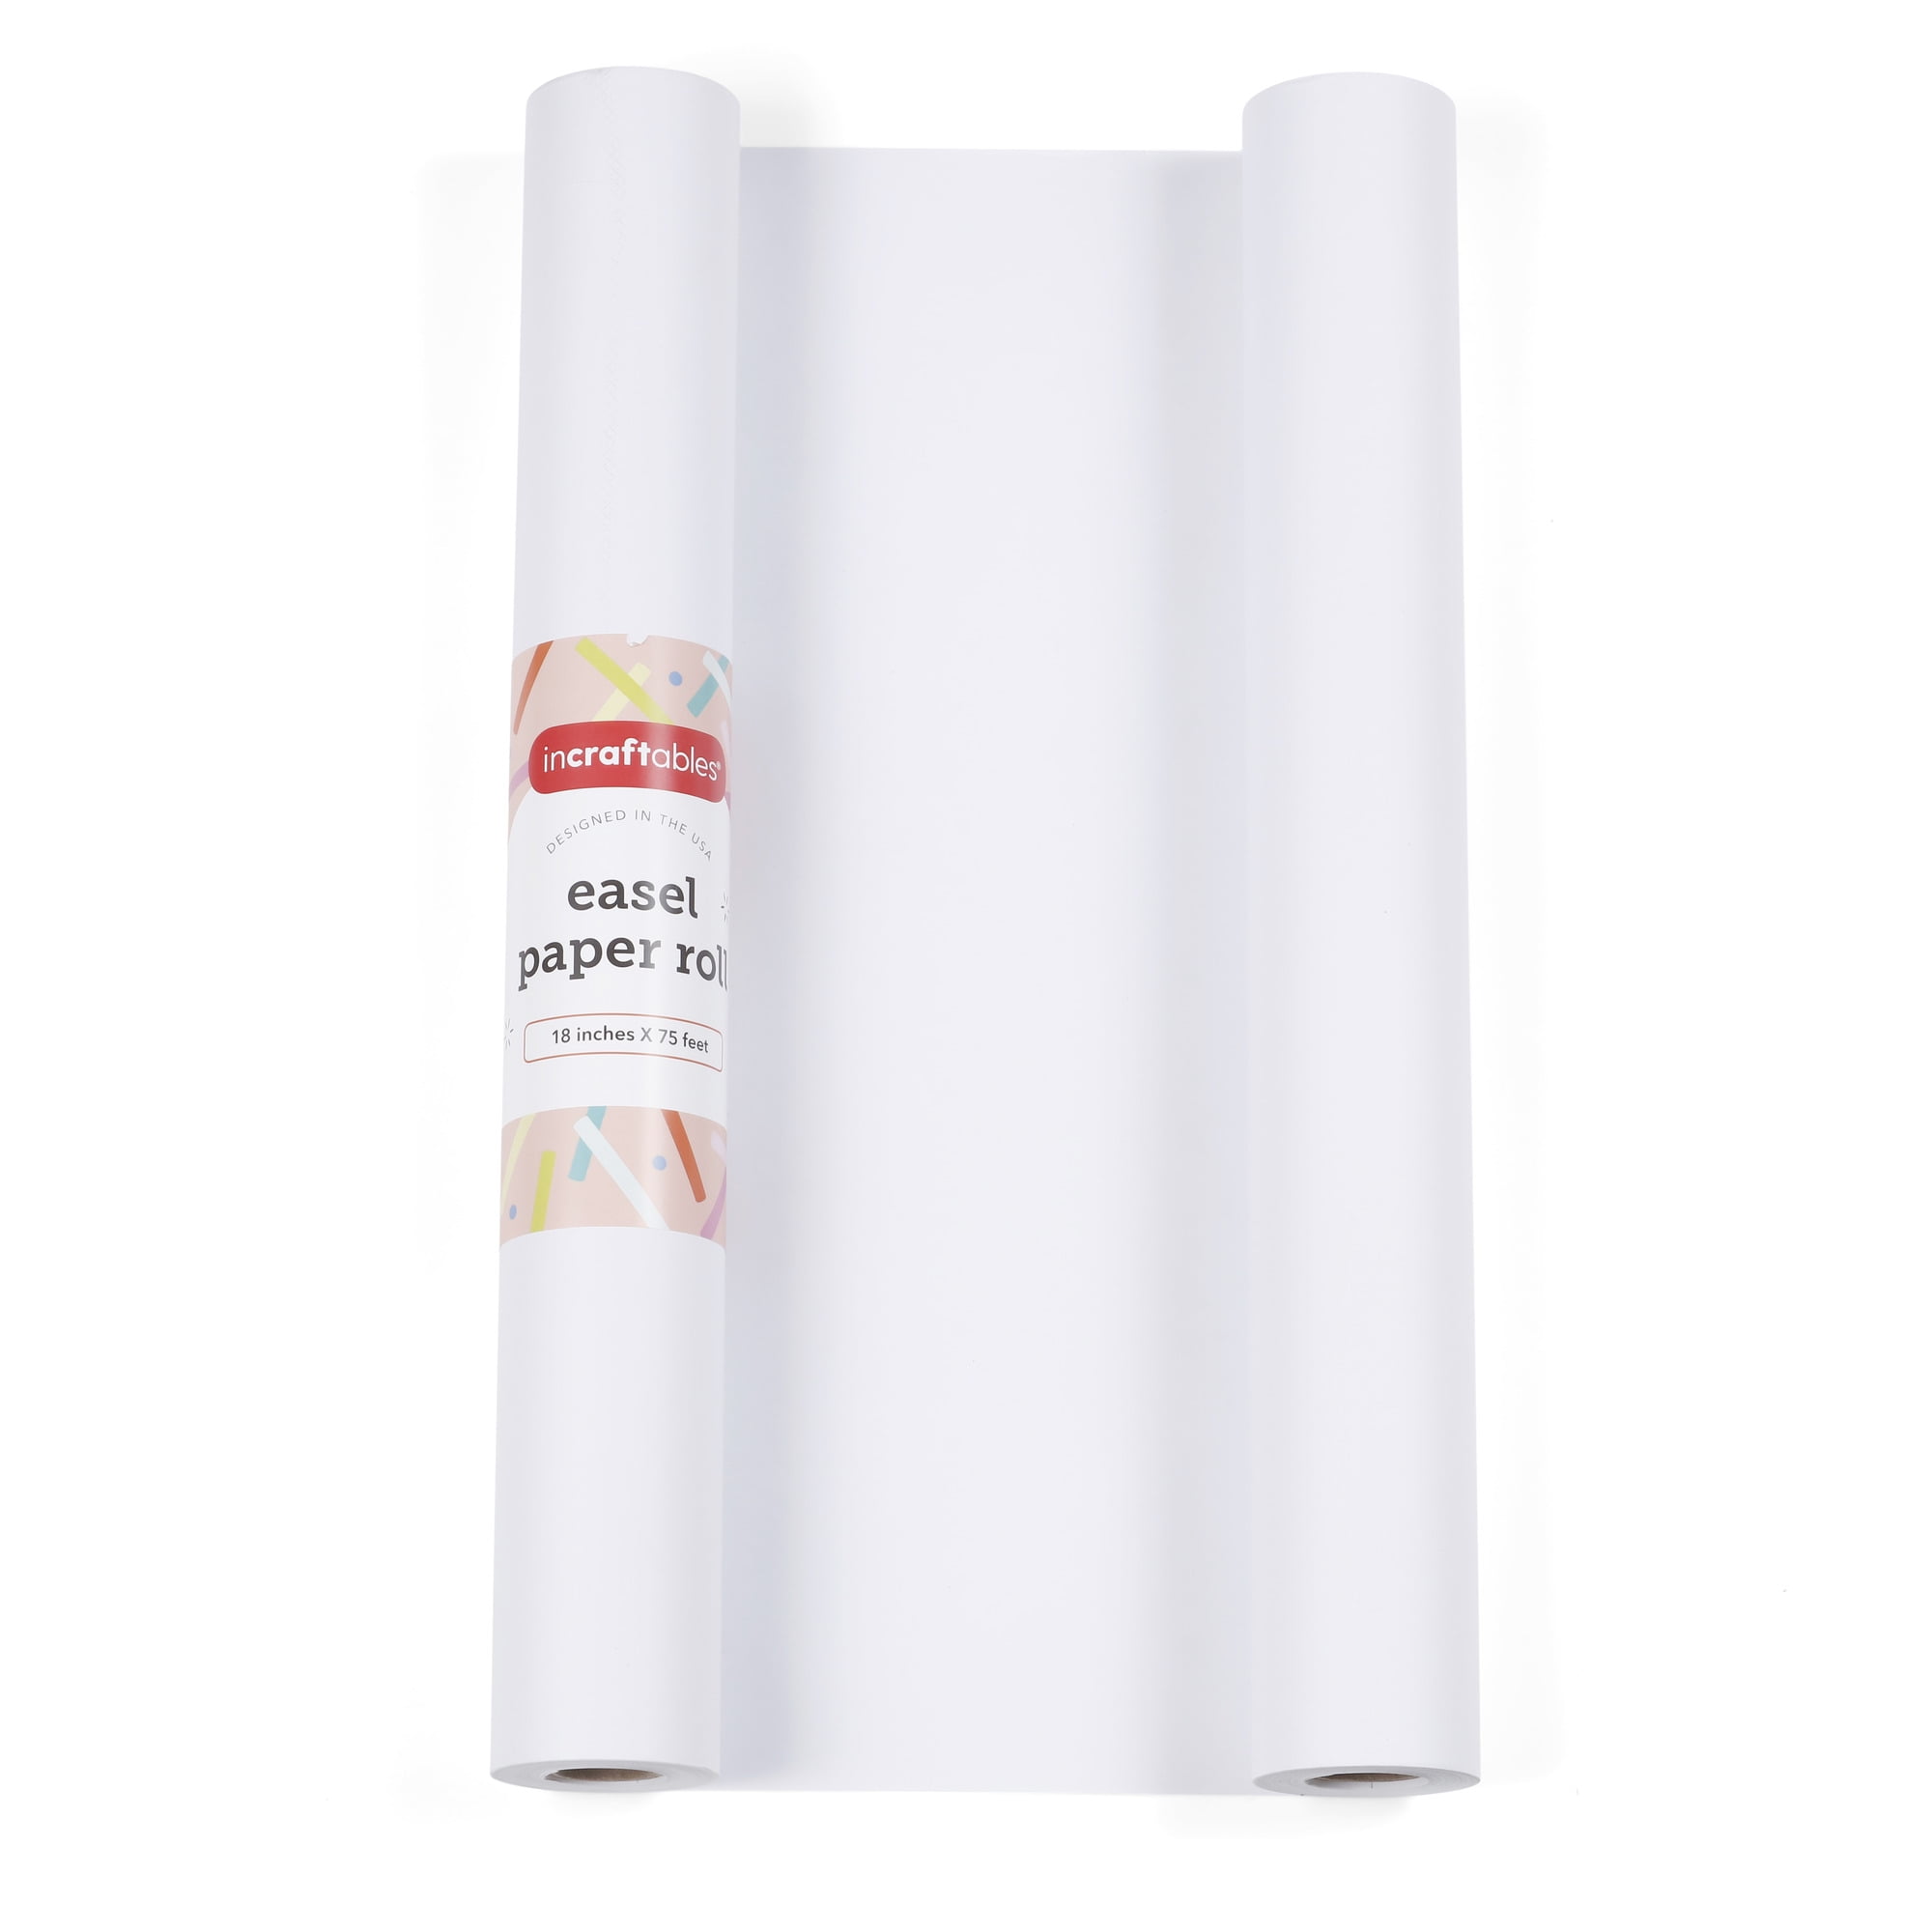 1pcs White Kraft Arts Paper Roll For Paints, Wall Art, Easel Paper